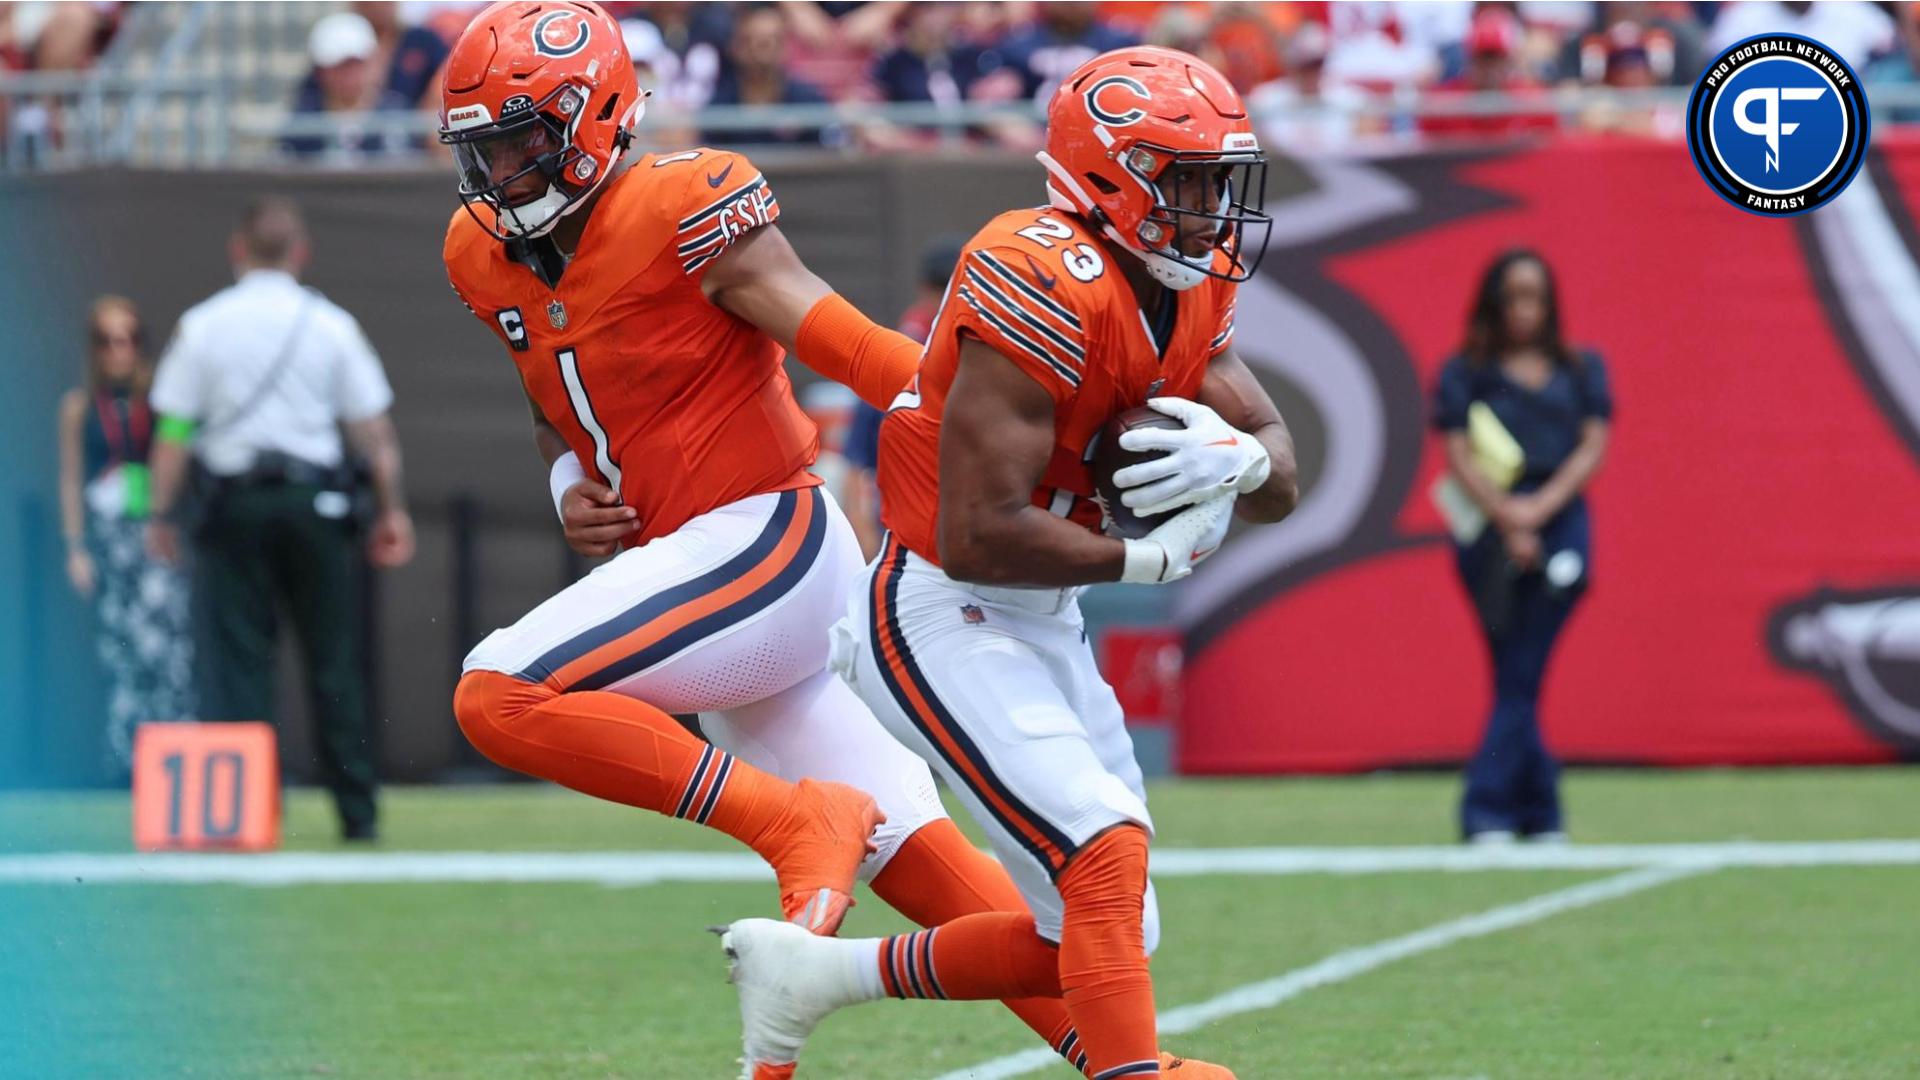 Roschon Johnson Fantasy Waiver Wire: Should I Pick Up the Bears RB